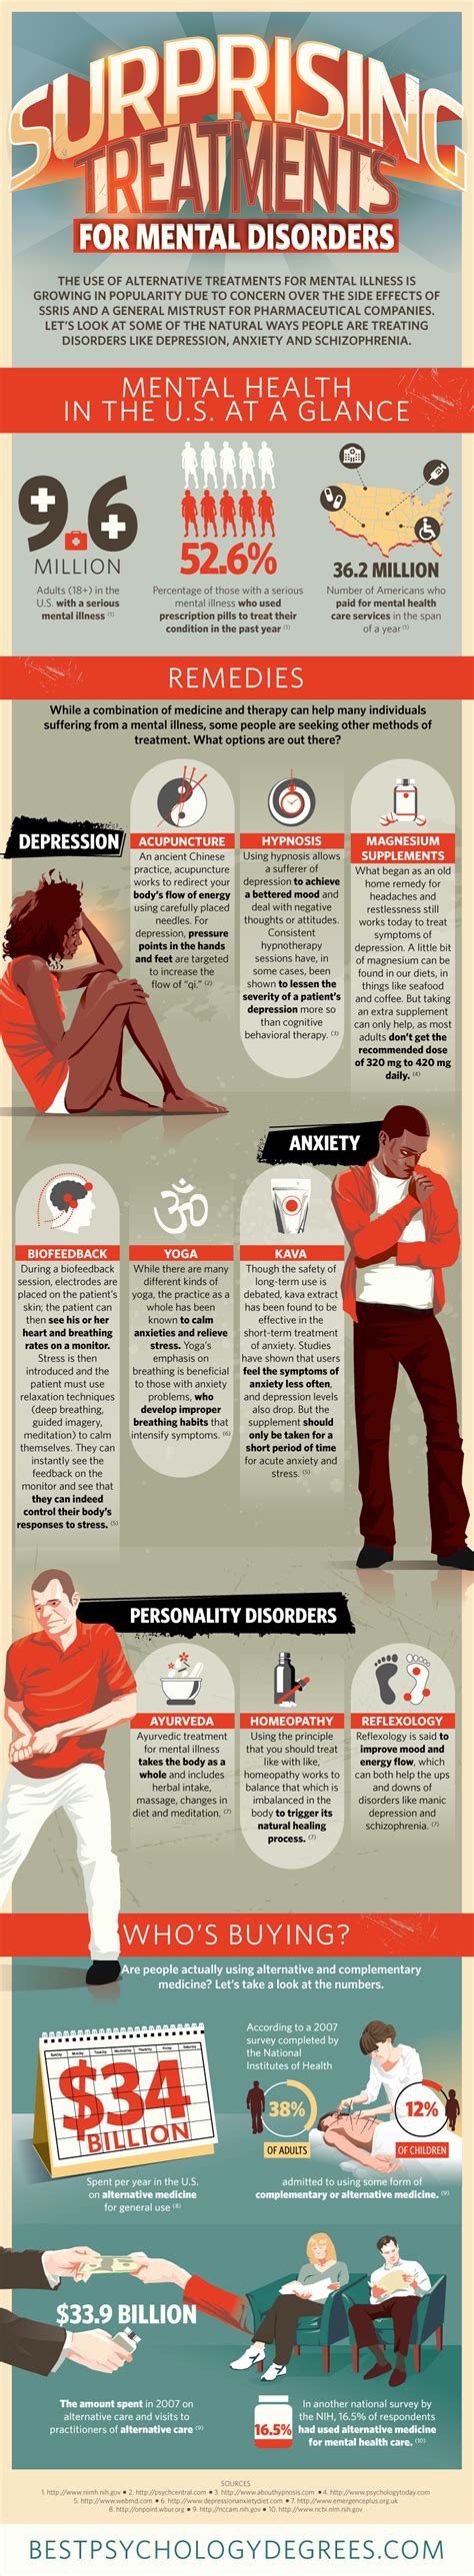 Surprising Alternative Treatments For Mental Disorders Infographic